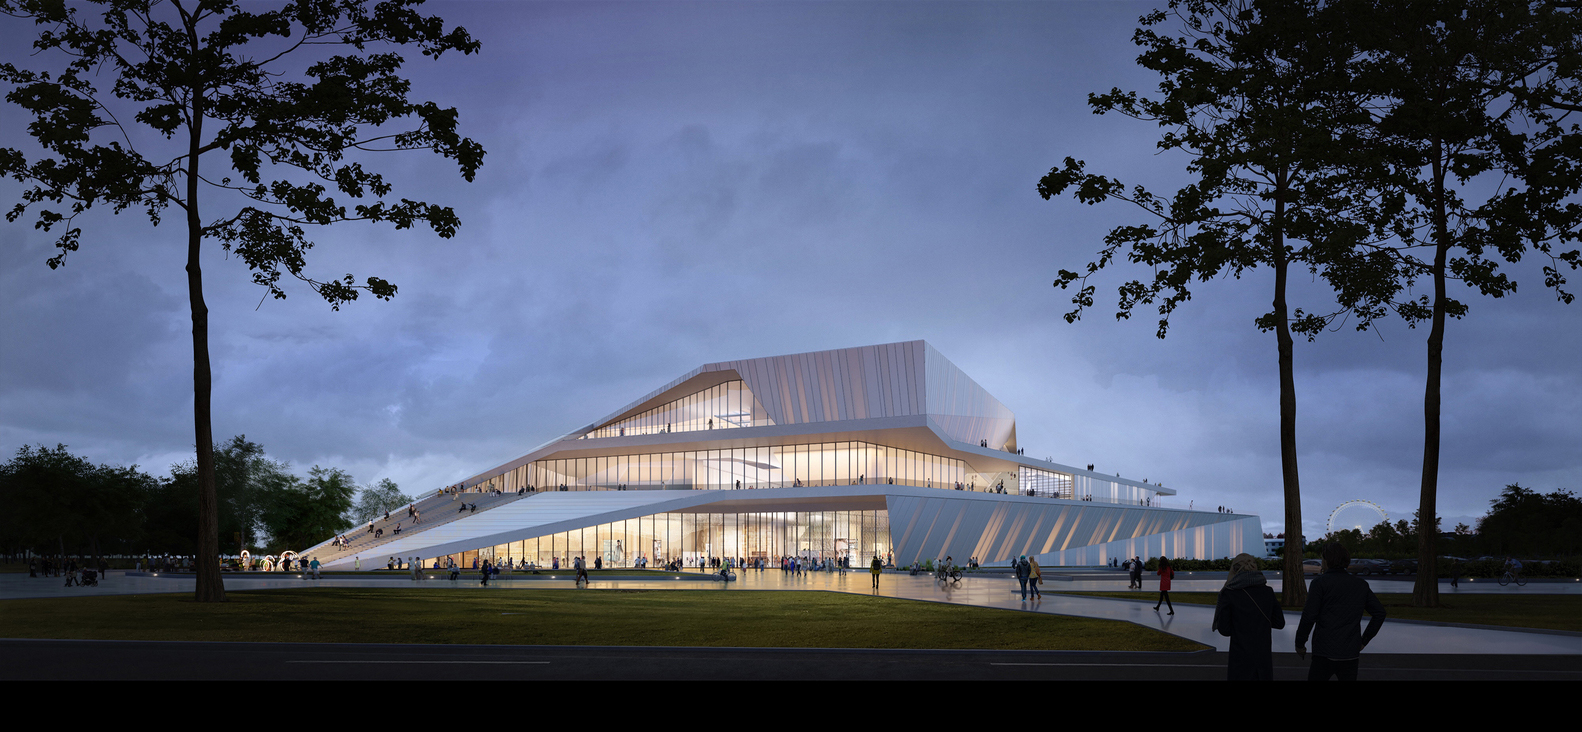 Dutch architectural firm UNStudio has won the competition to design the line, which is set to connect the two cities of Blagoveshchensk and Heihe